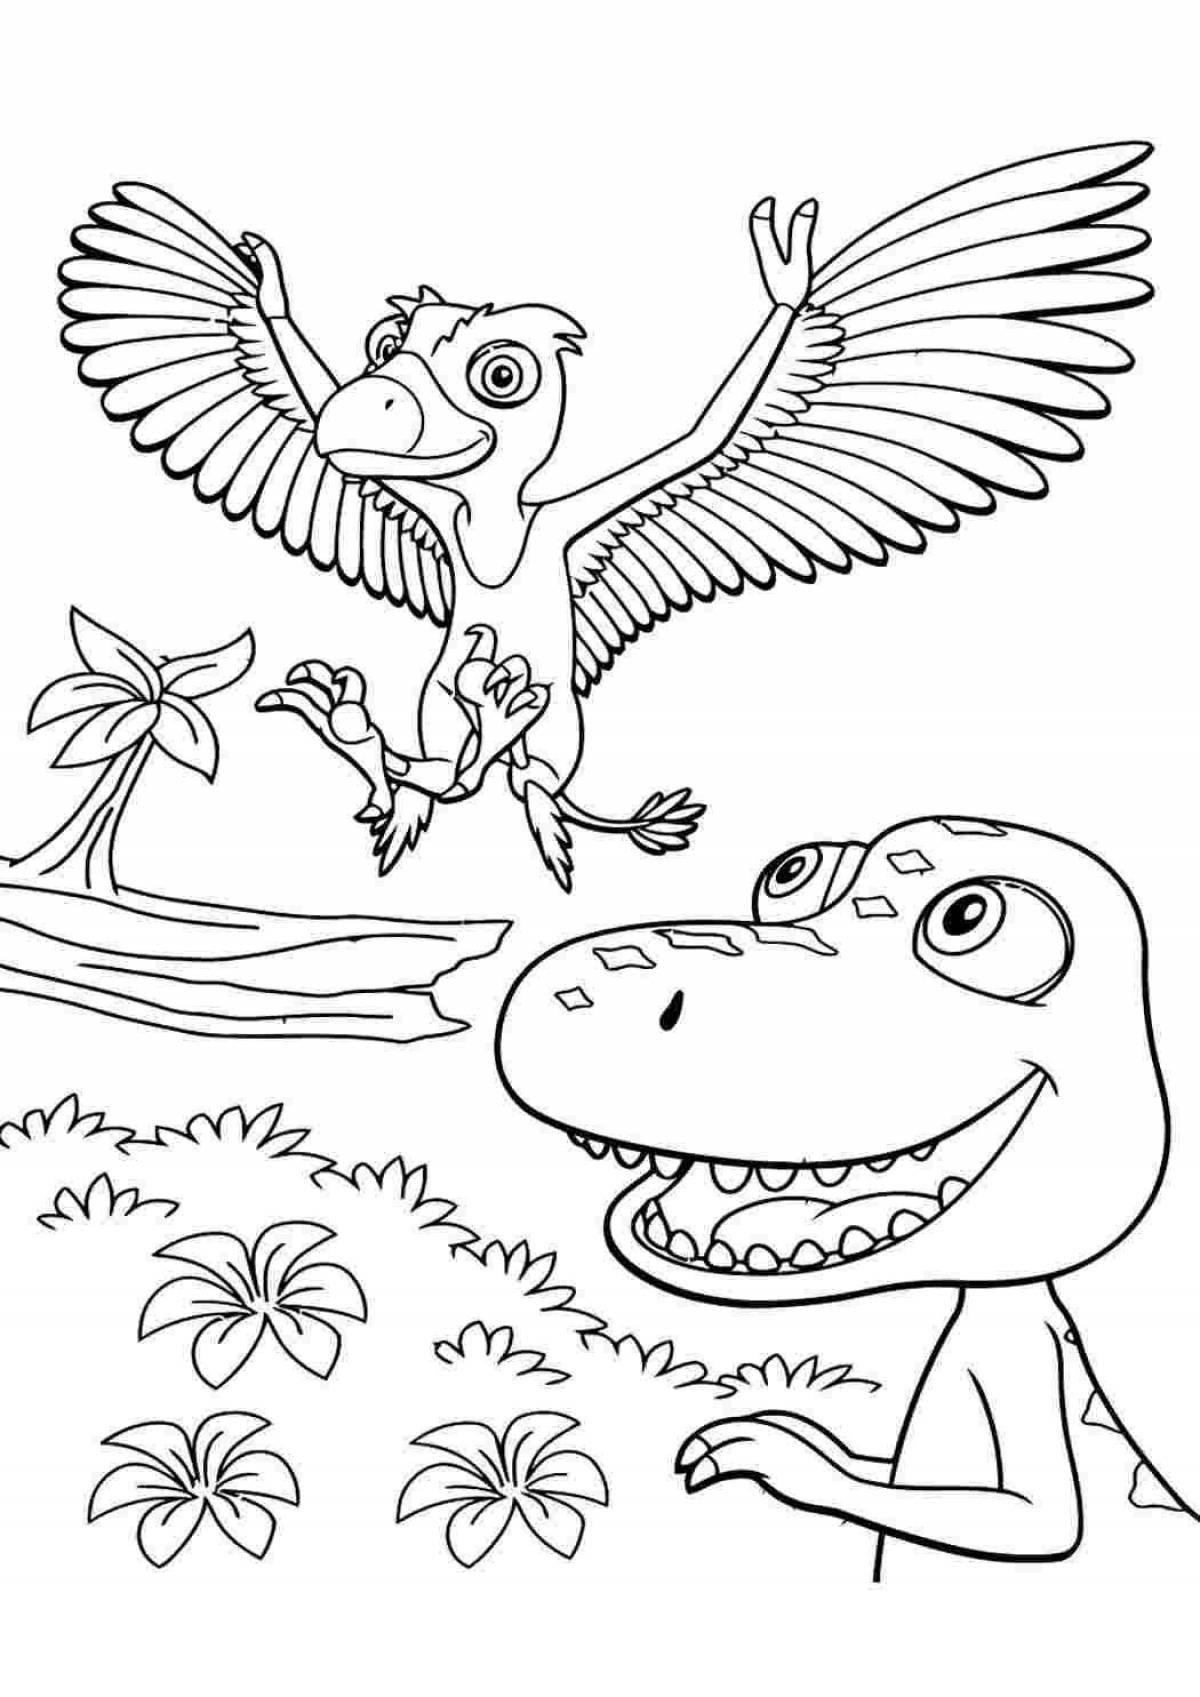 Colorful turbosaur coloring page